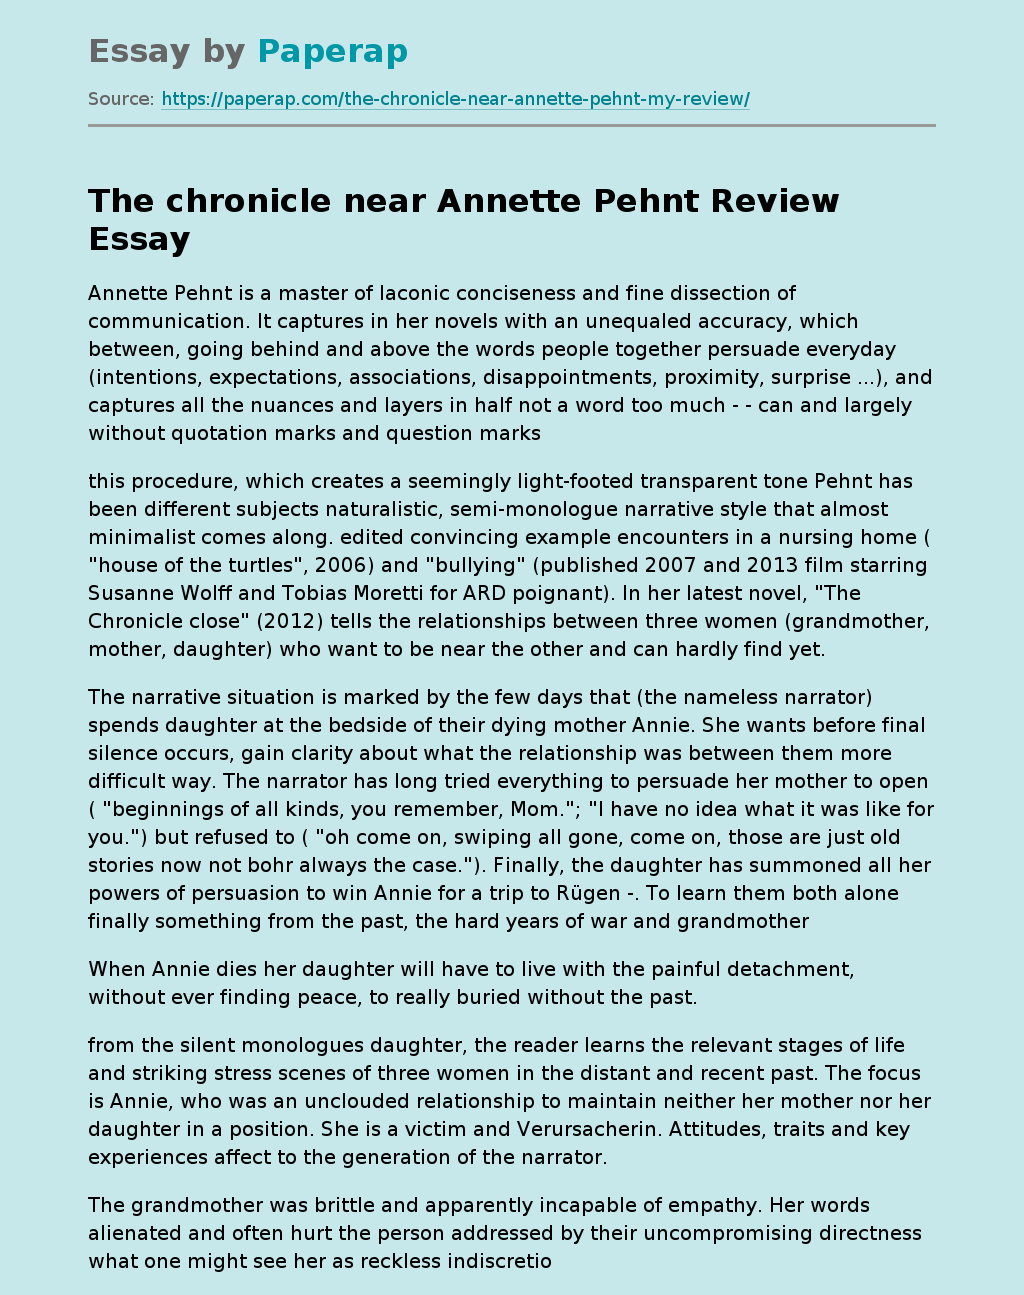 The Chronicle Near Annette Pehnt Review